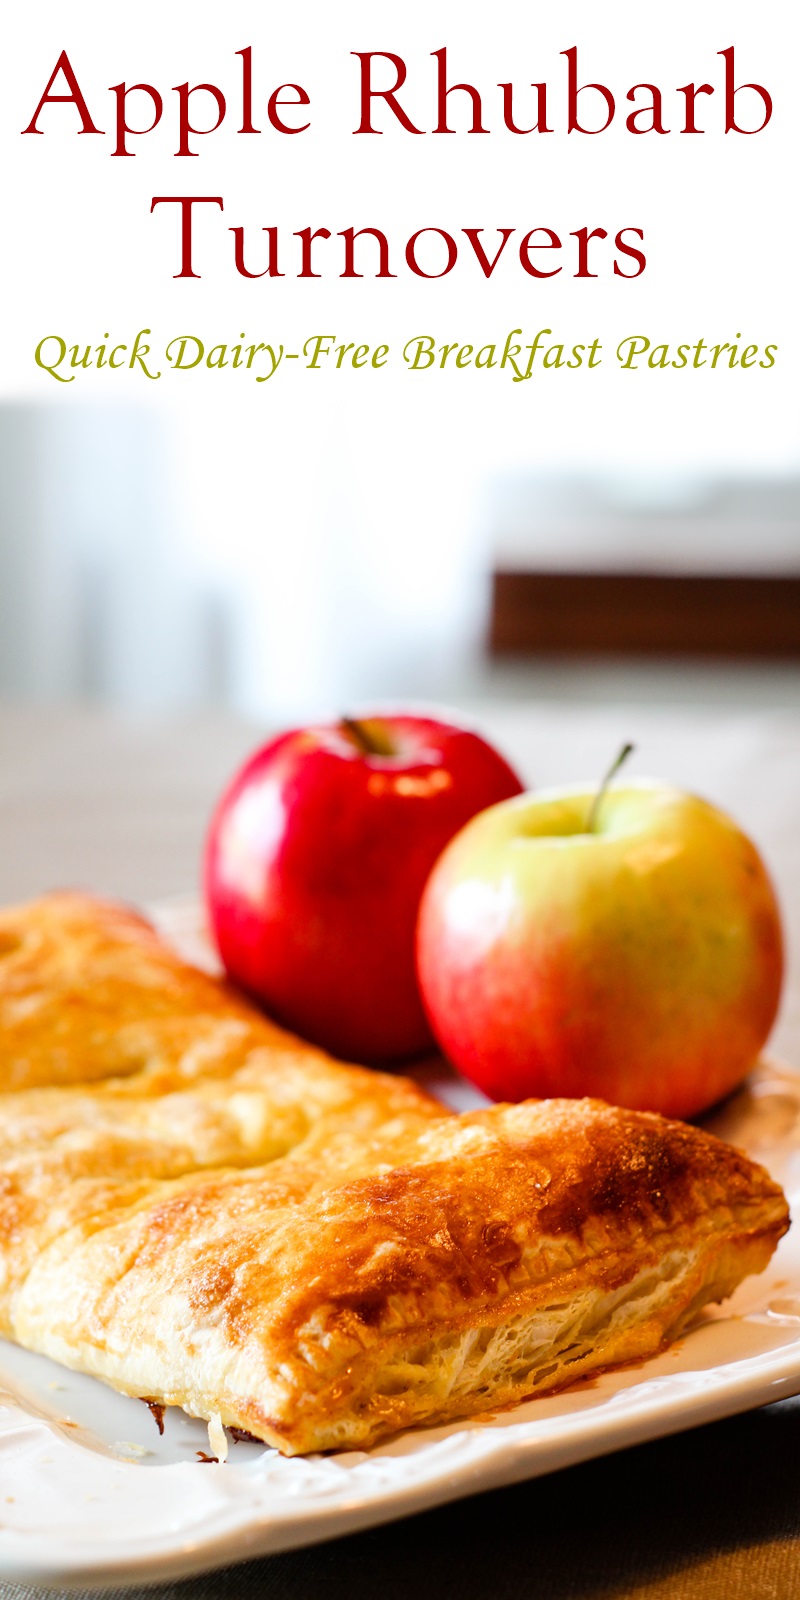 Apple Rhubarb Turnovers Recipe - Easy, Quick, Dairy-Free, Nut-Free and Vegan Optional